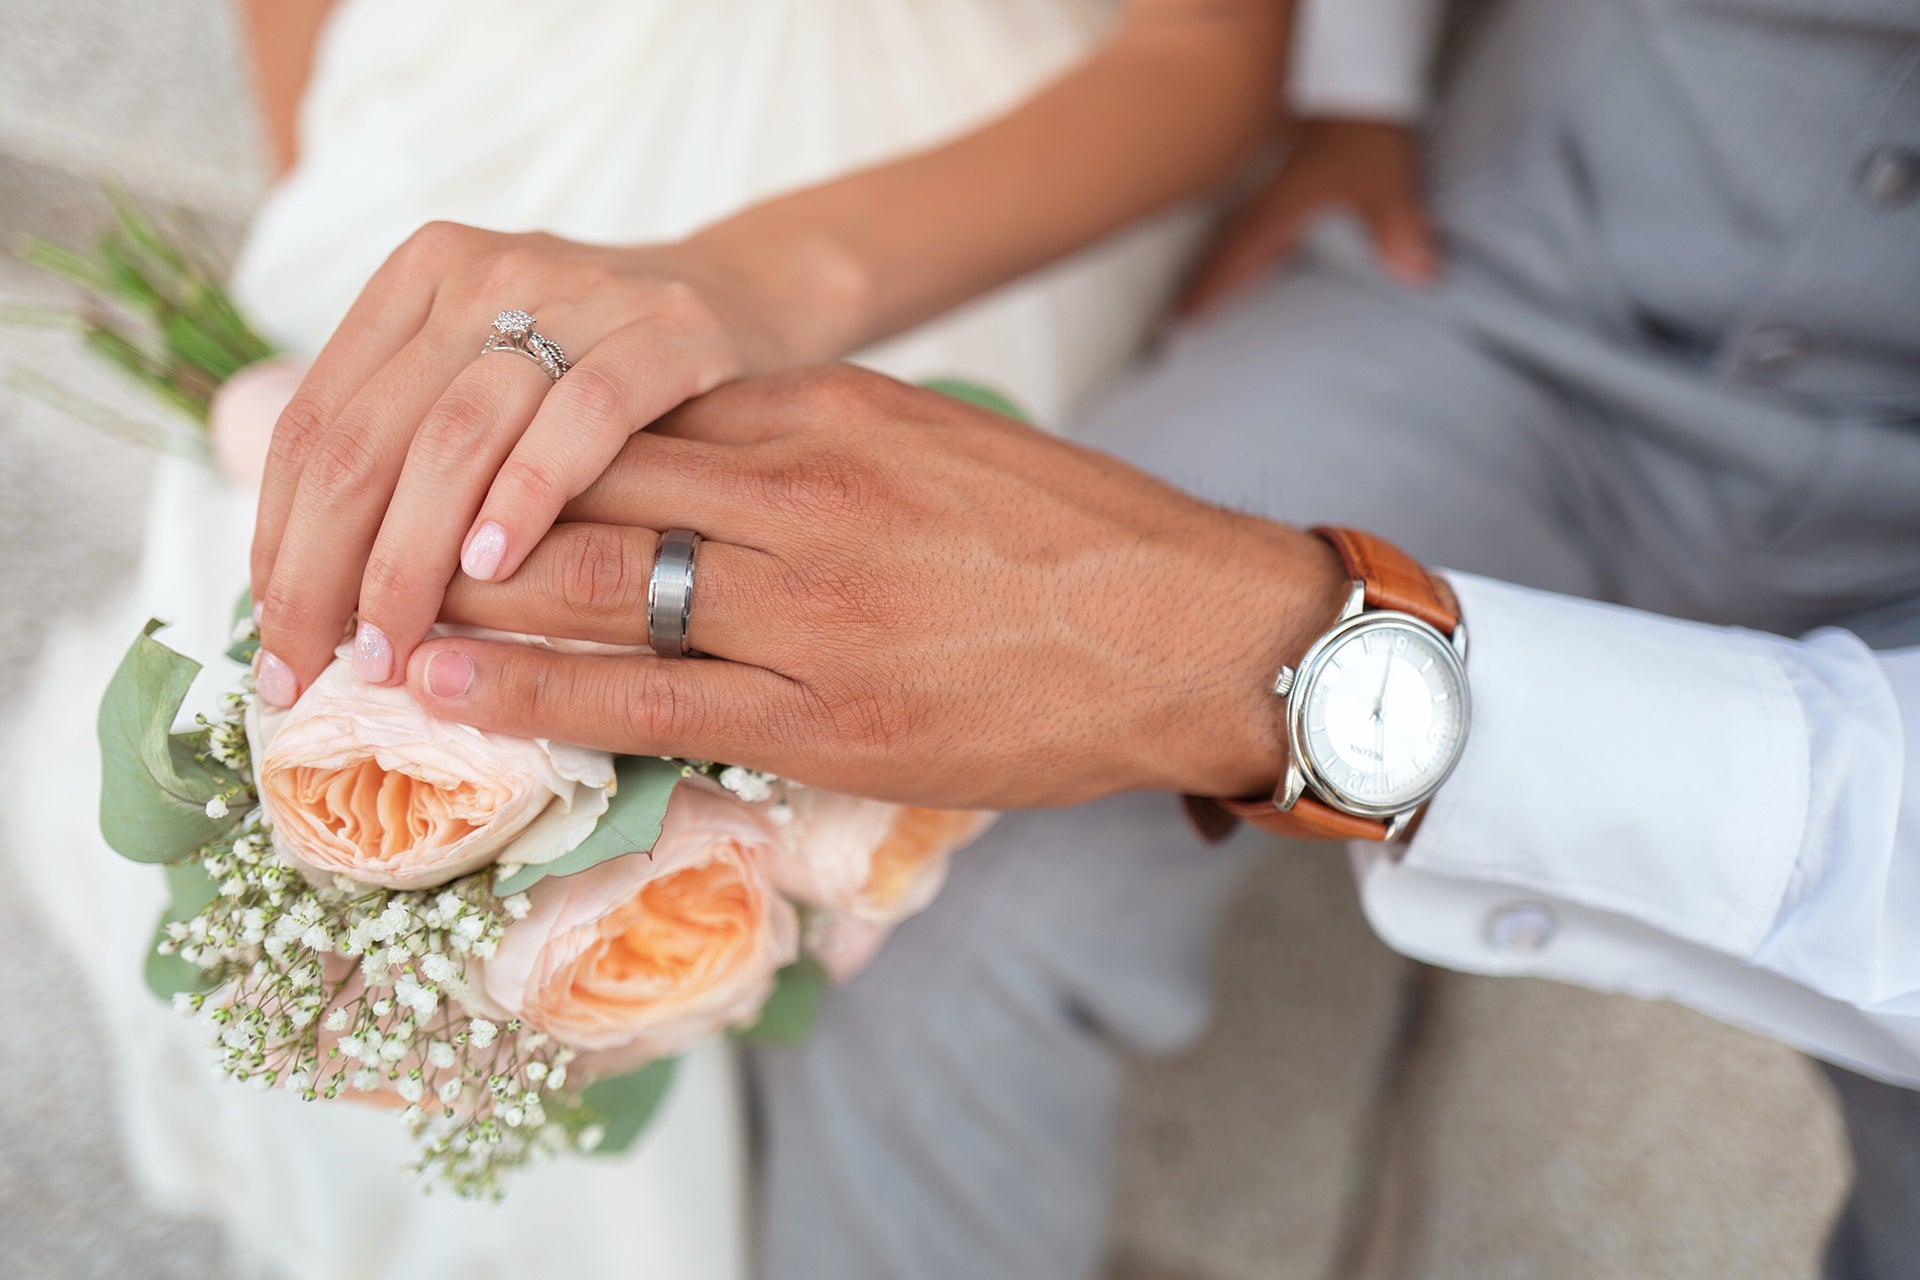 You're Getting Married! Now What?